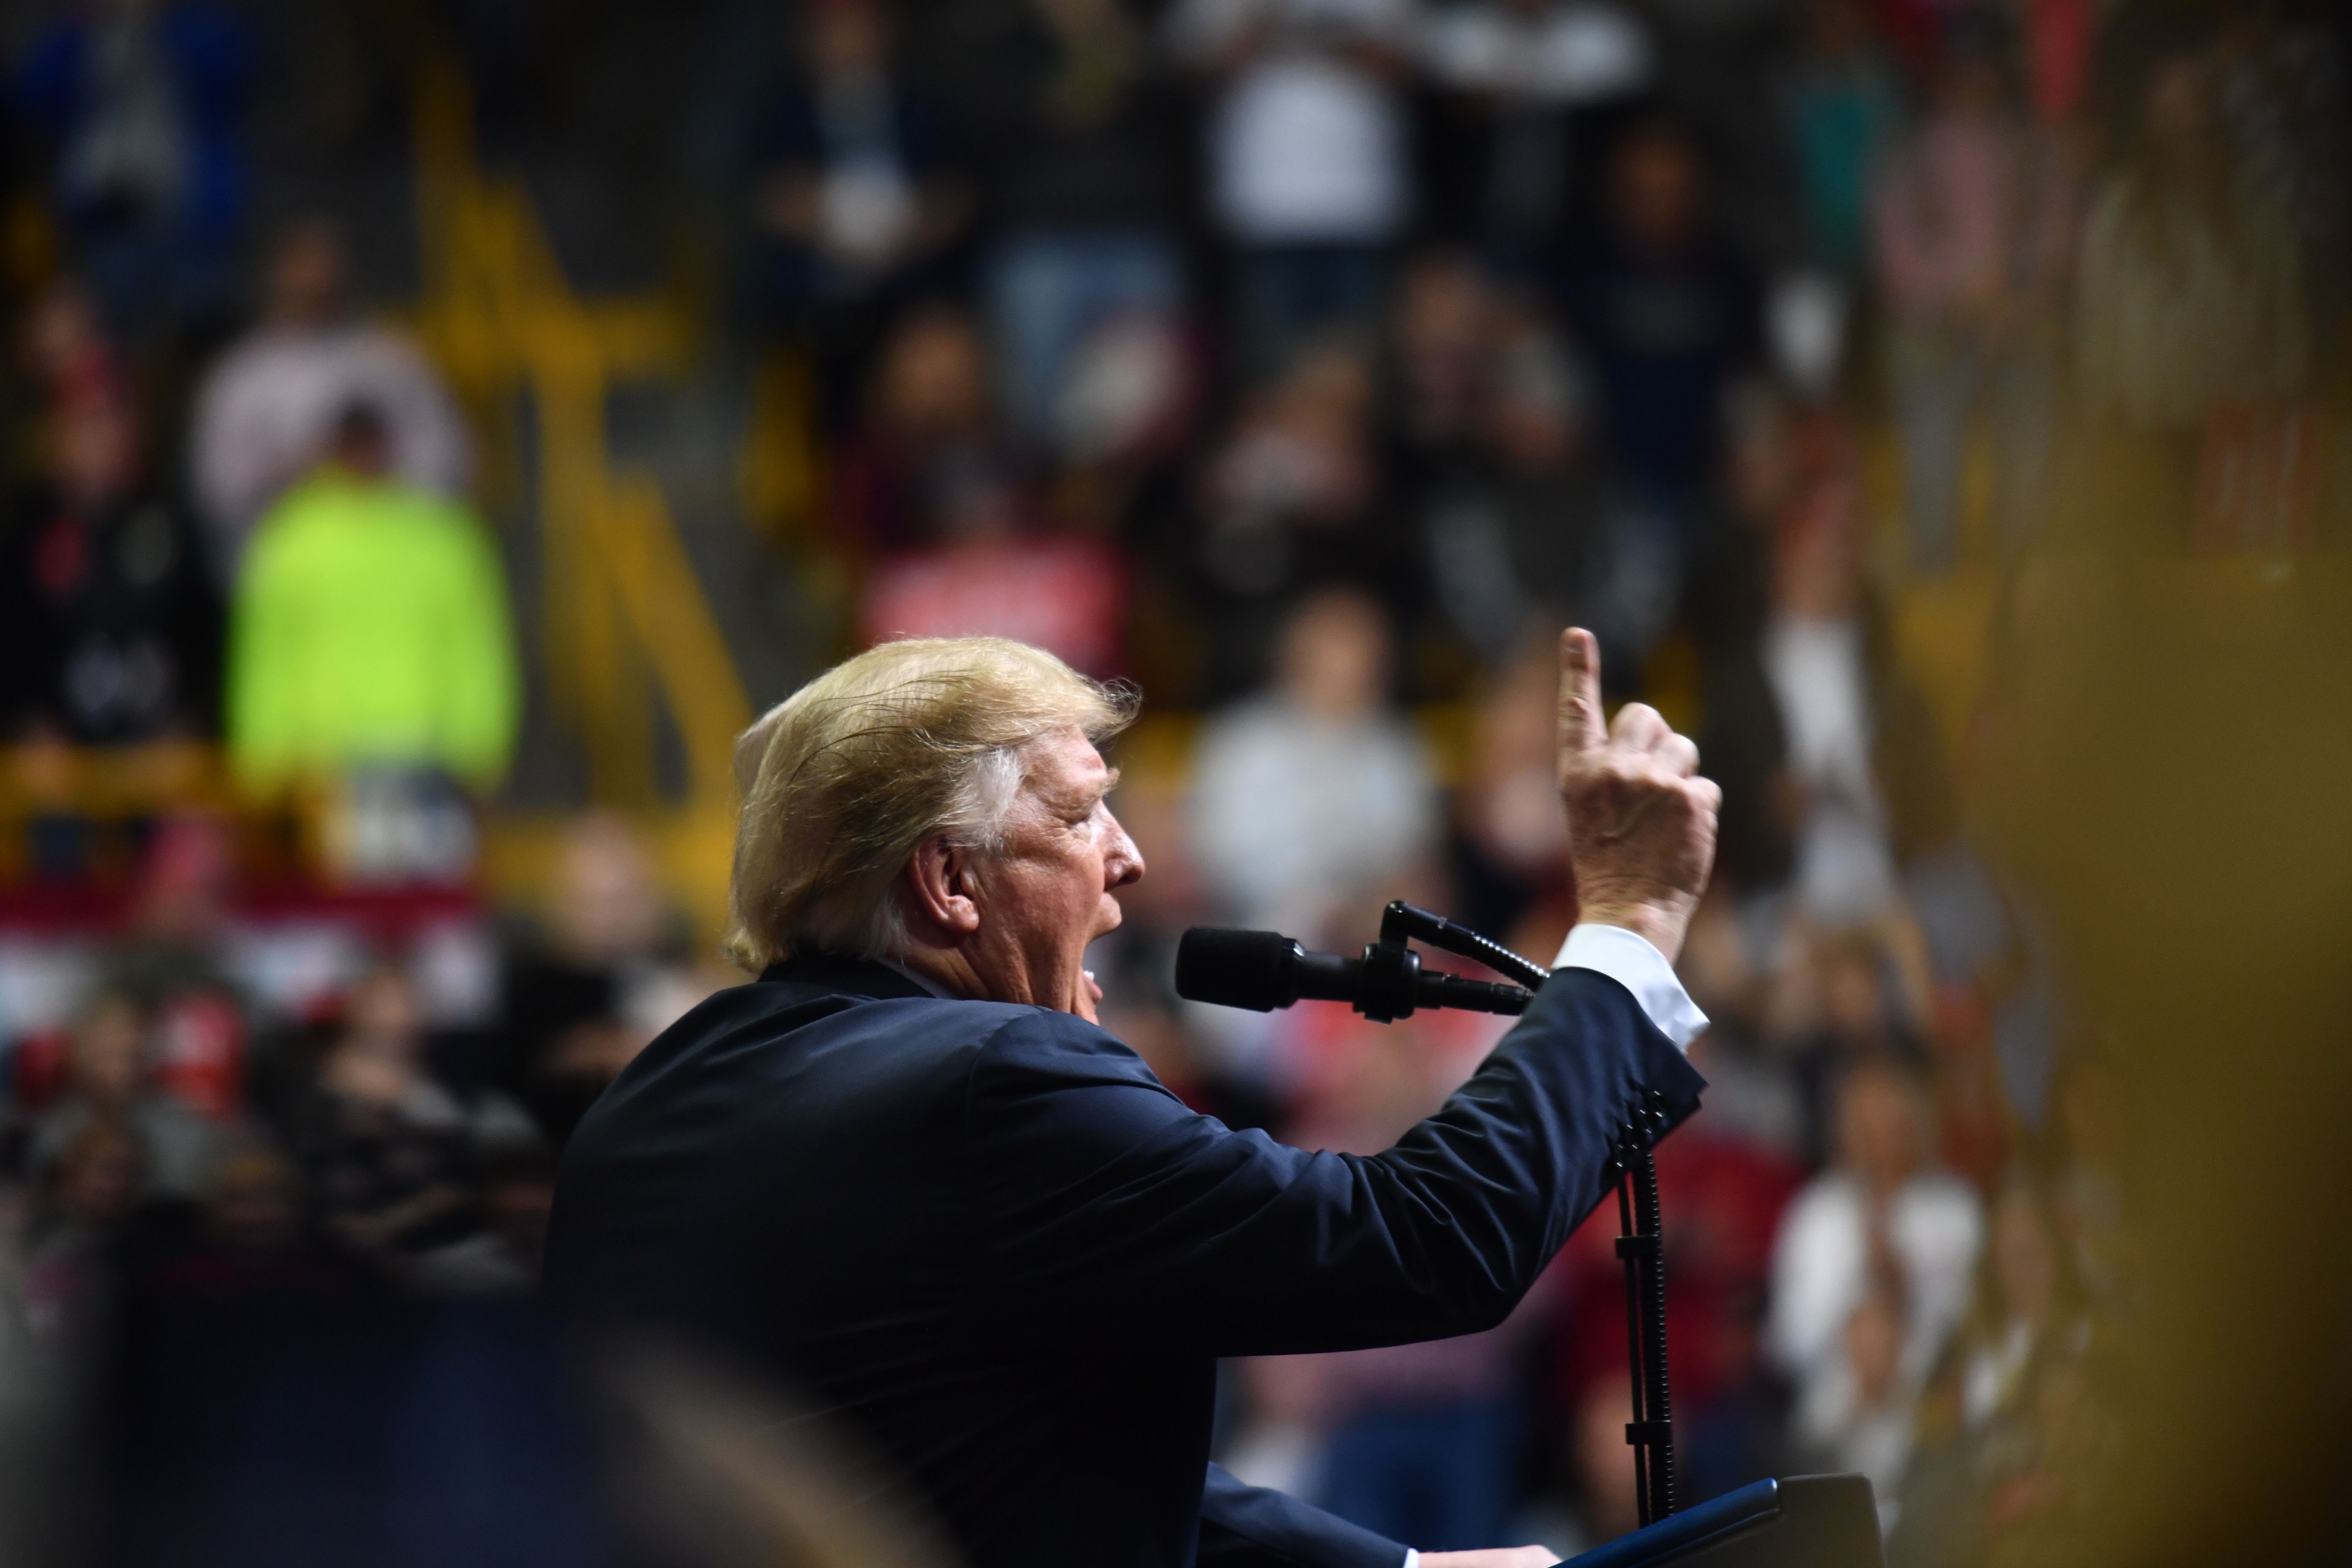 Trump at a rally in Chattanooga, Tennessee